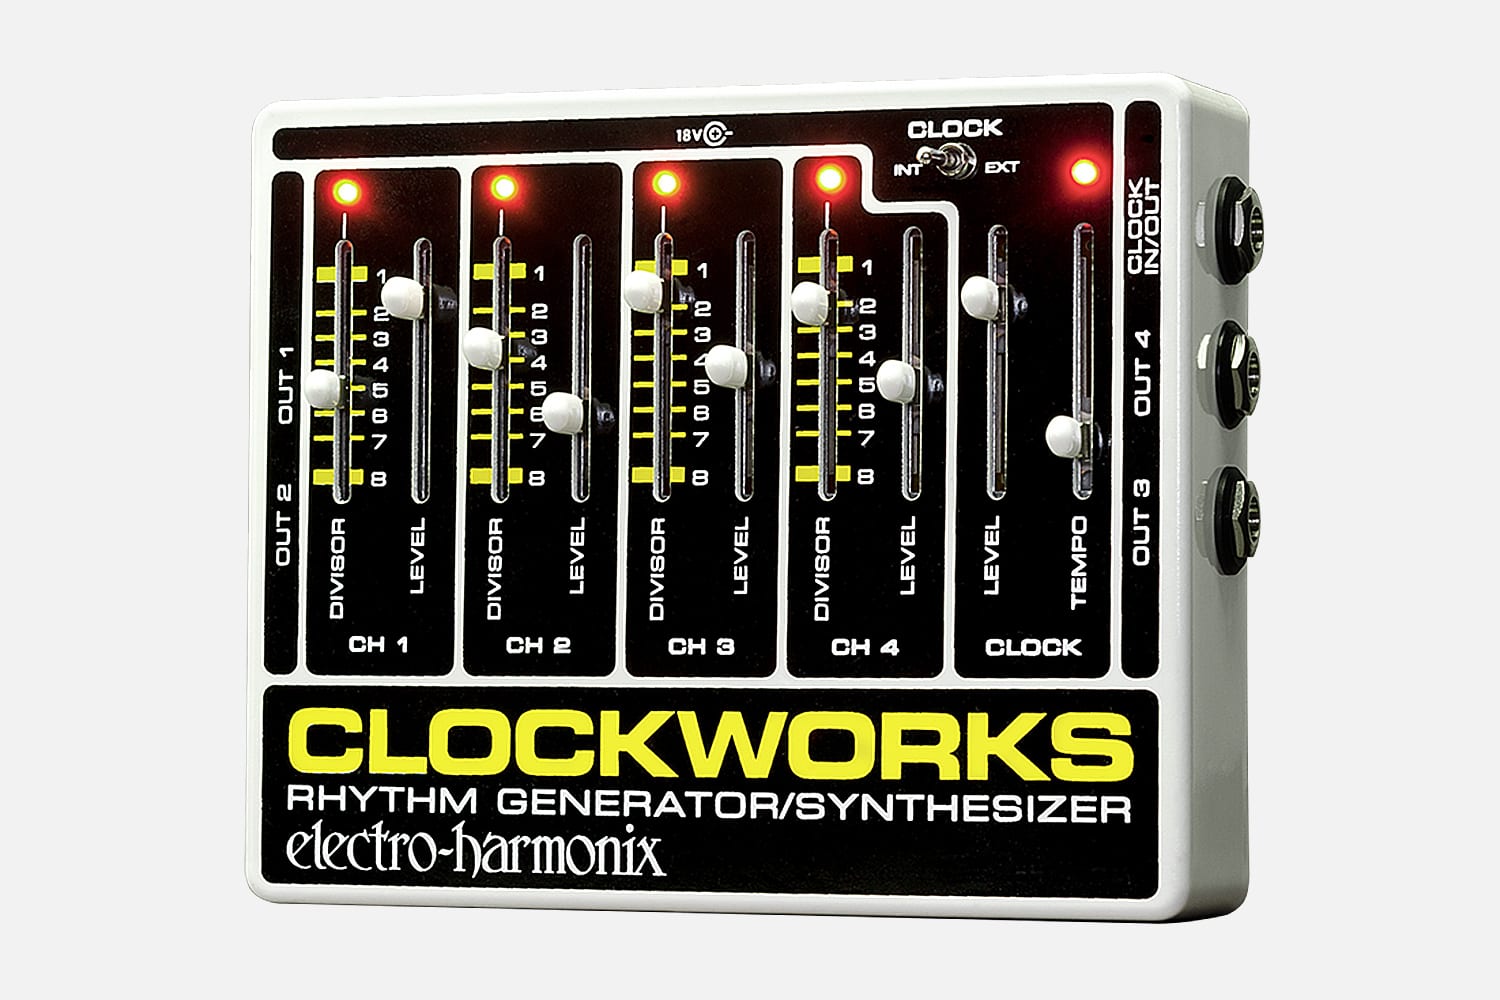 Introducing the Clockworks